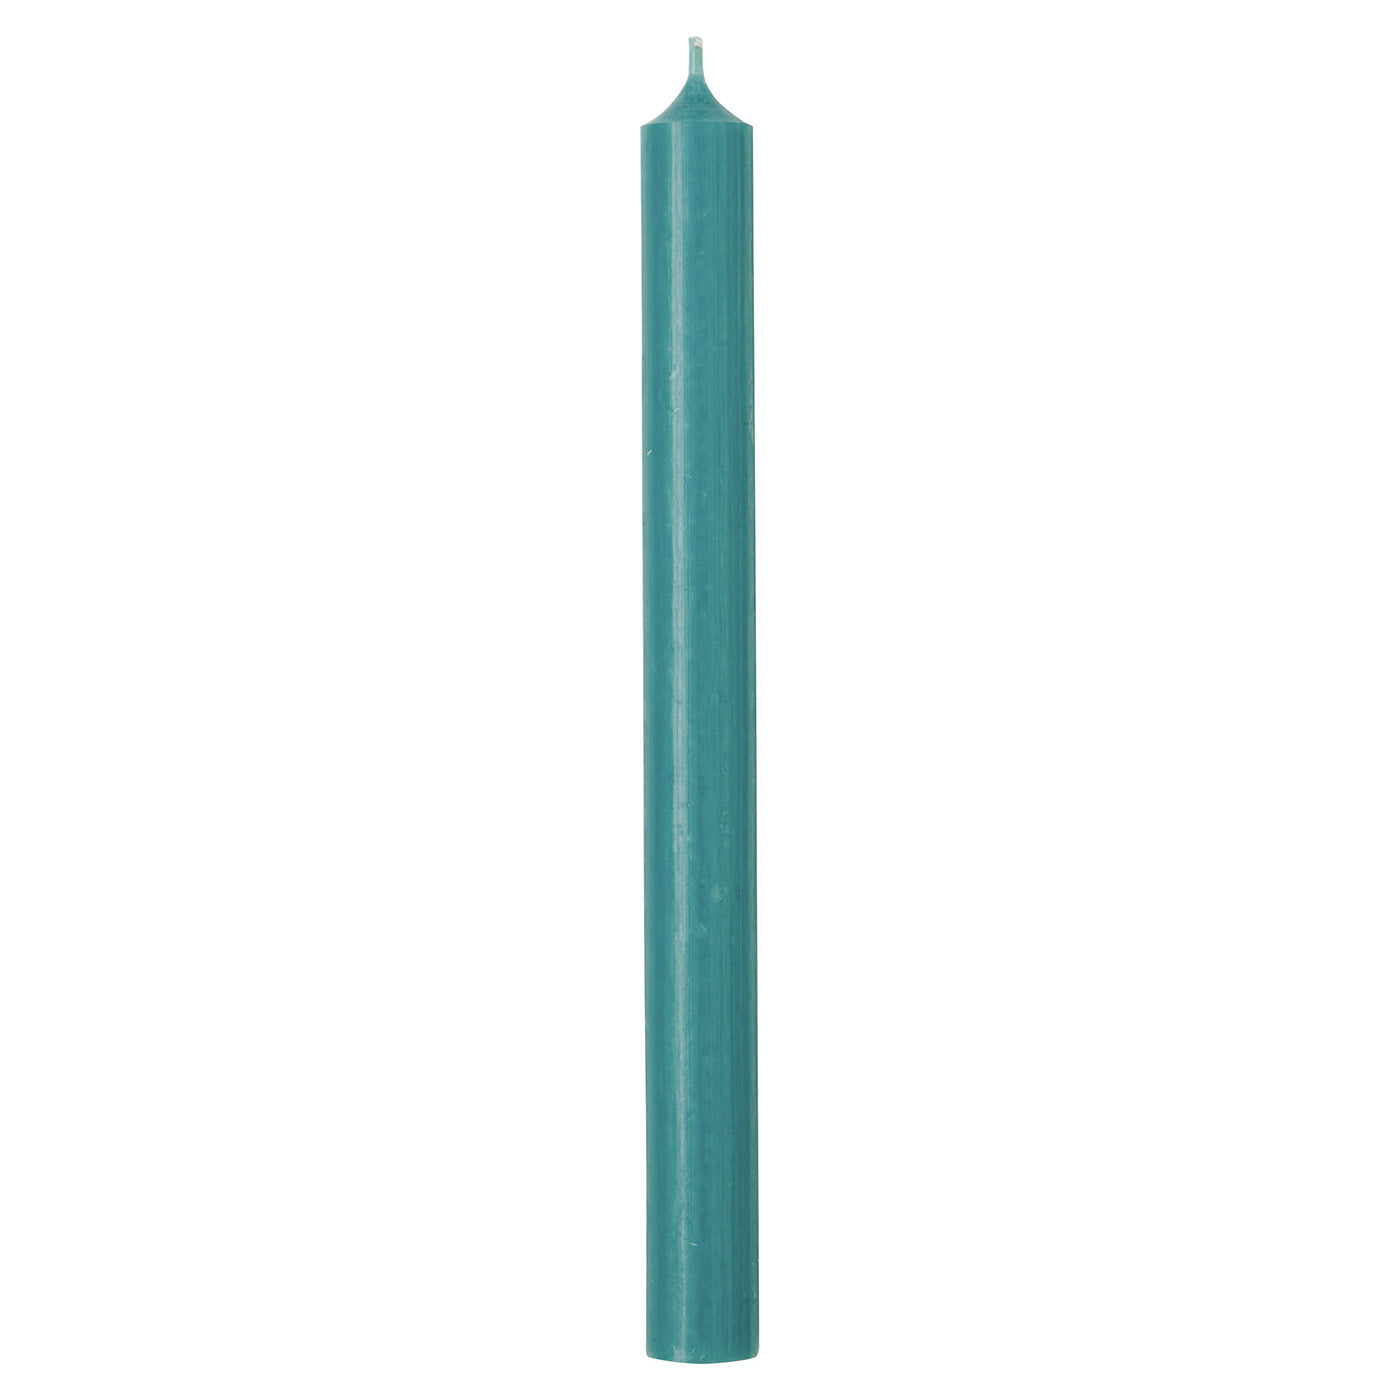 IHR Cylinder Candle Turquoise